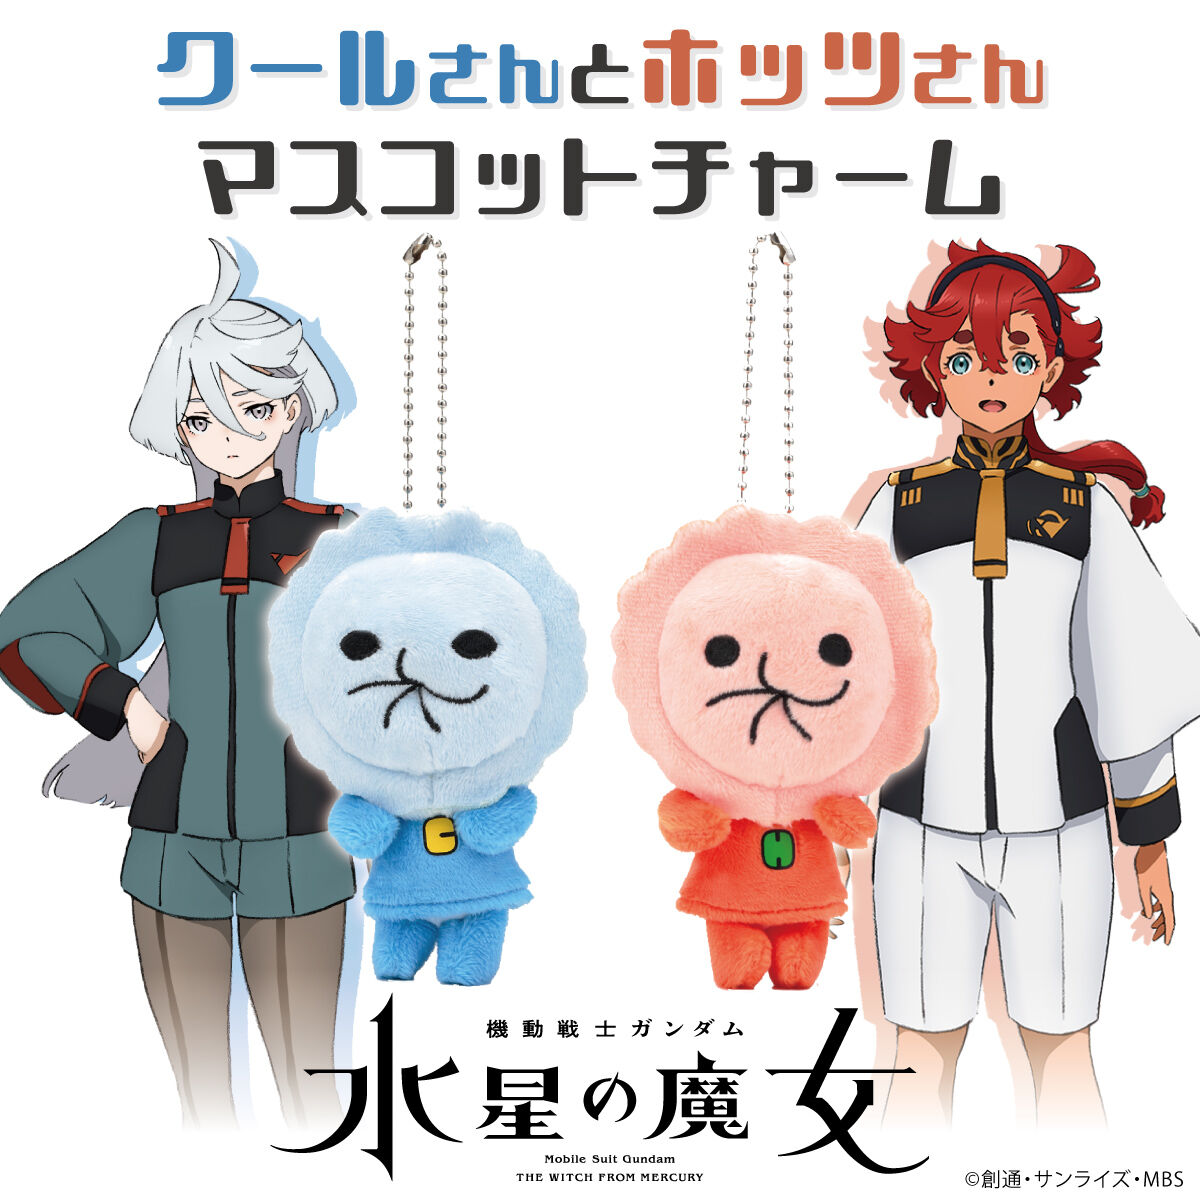 Mobile Suit Gundam the Witch from Mercury - Cool and Hots Mascot Keychains